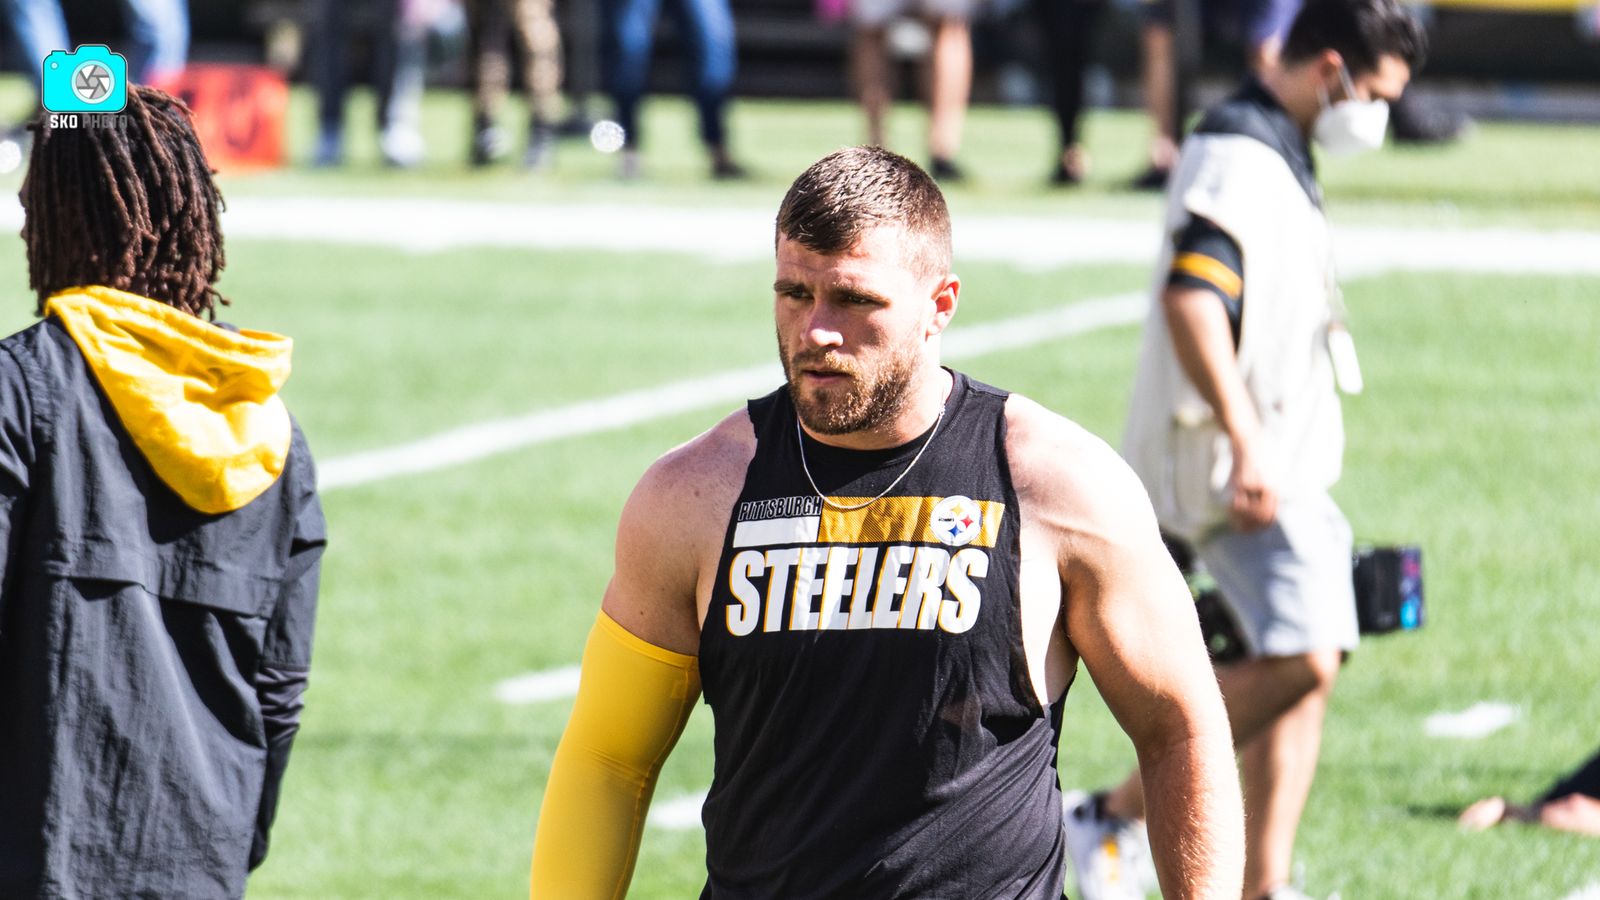 Steelers Star TJ Watt Says The Is Now" For Team To Win; Downplays Possible Transition Period